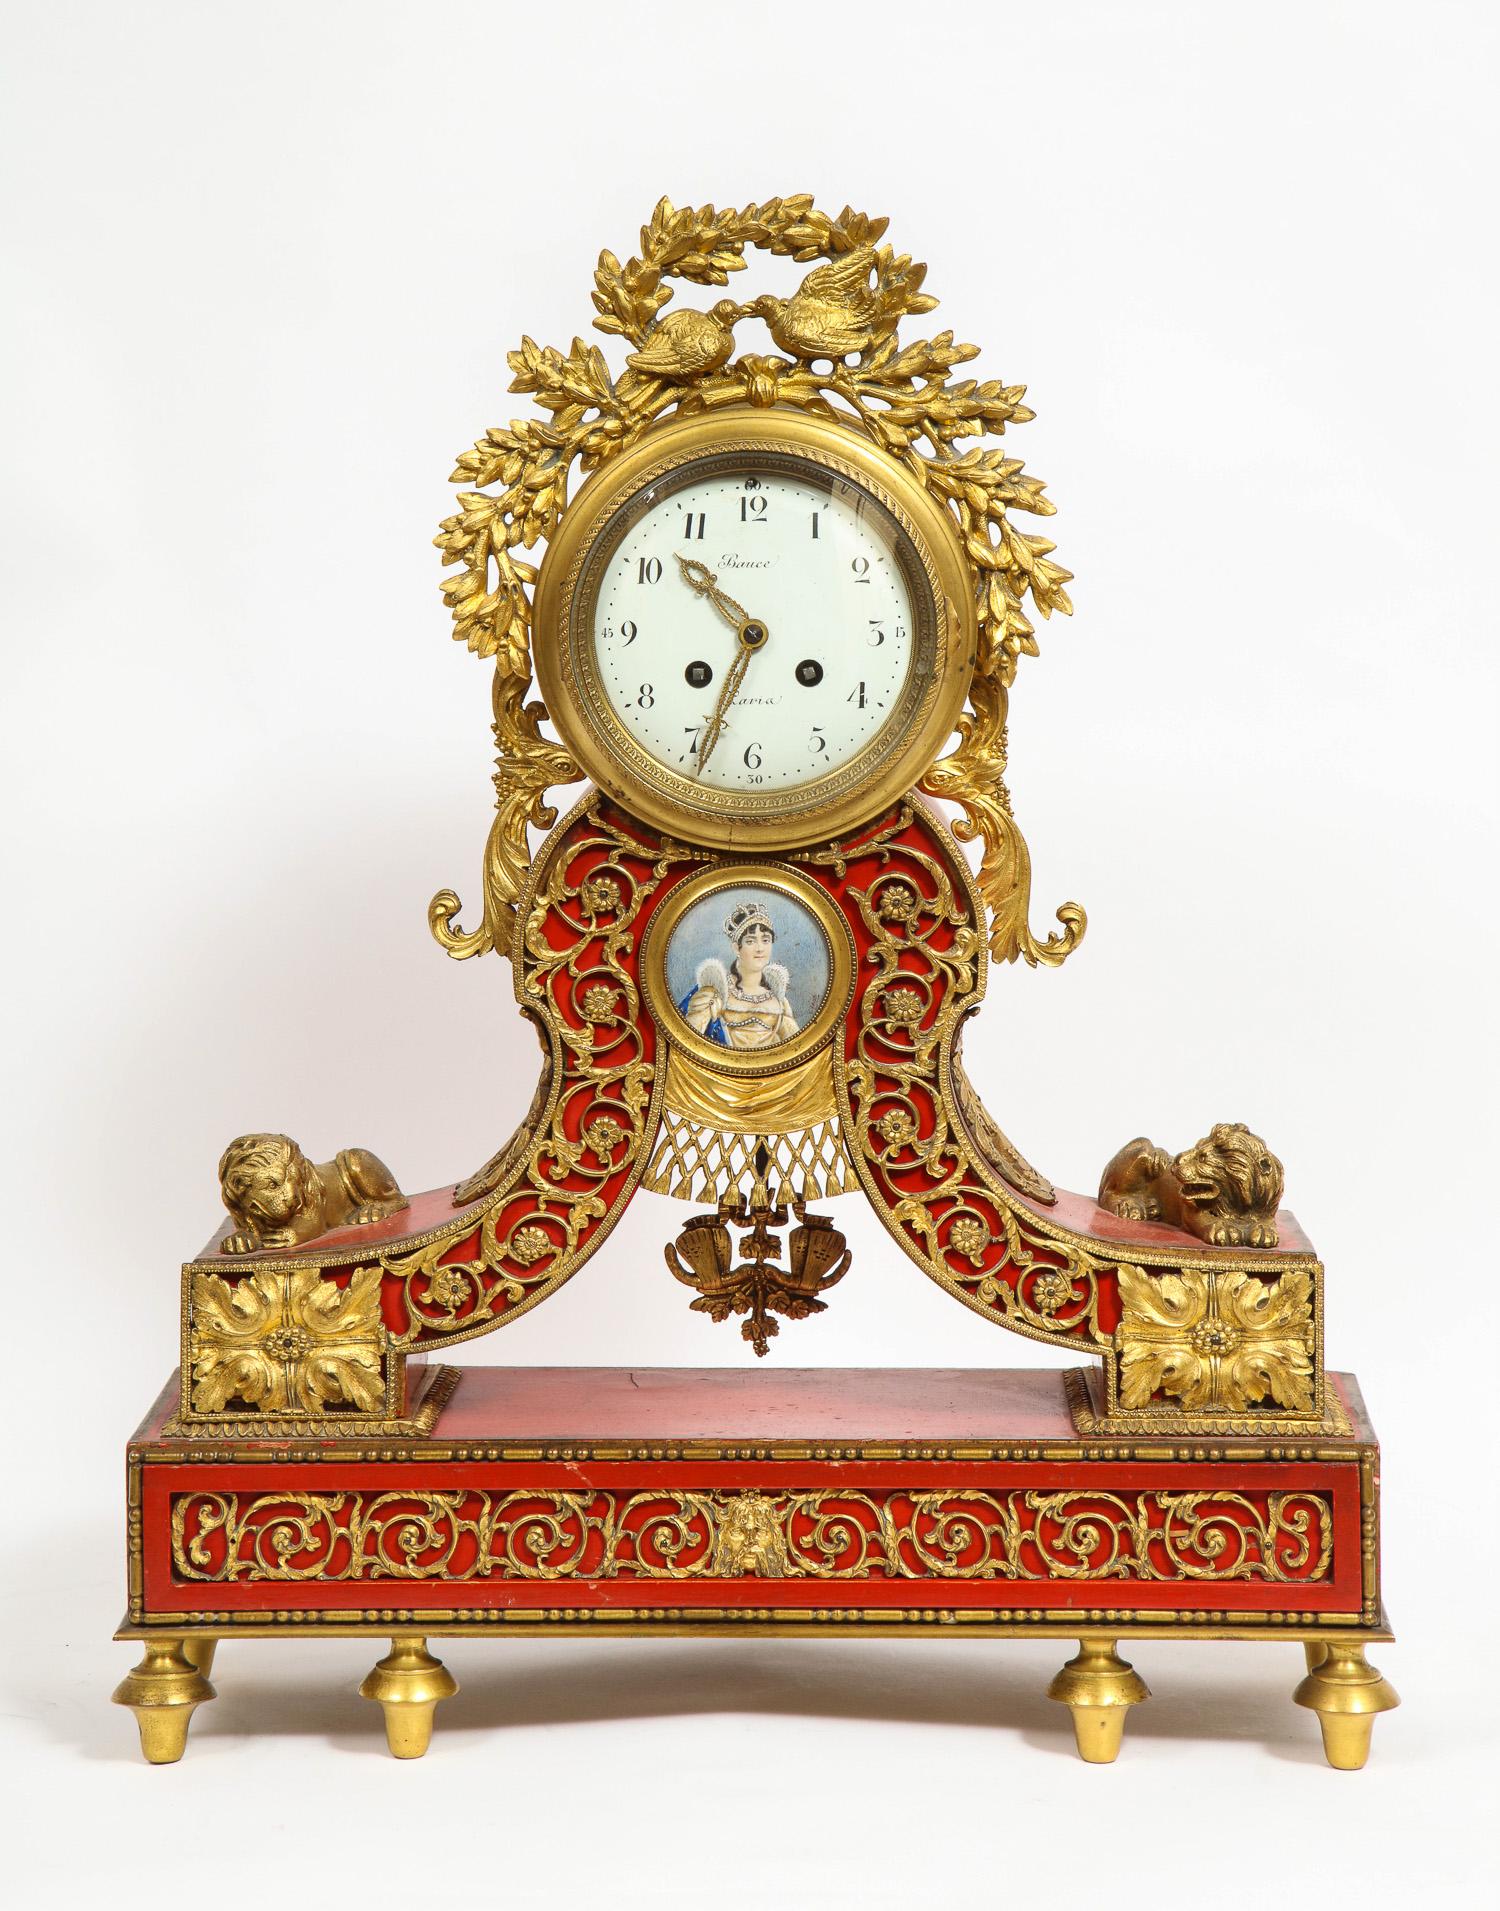 Gorgeous French ormolu gilt bronze-mounted red painted mantel clock, 1870

Clock dial signed Bauce Paris, with Arabic numerals, in a Red case surmounted by love birds within ribbon tied flowering boughs, centered by a portrait miniature of